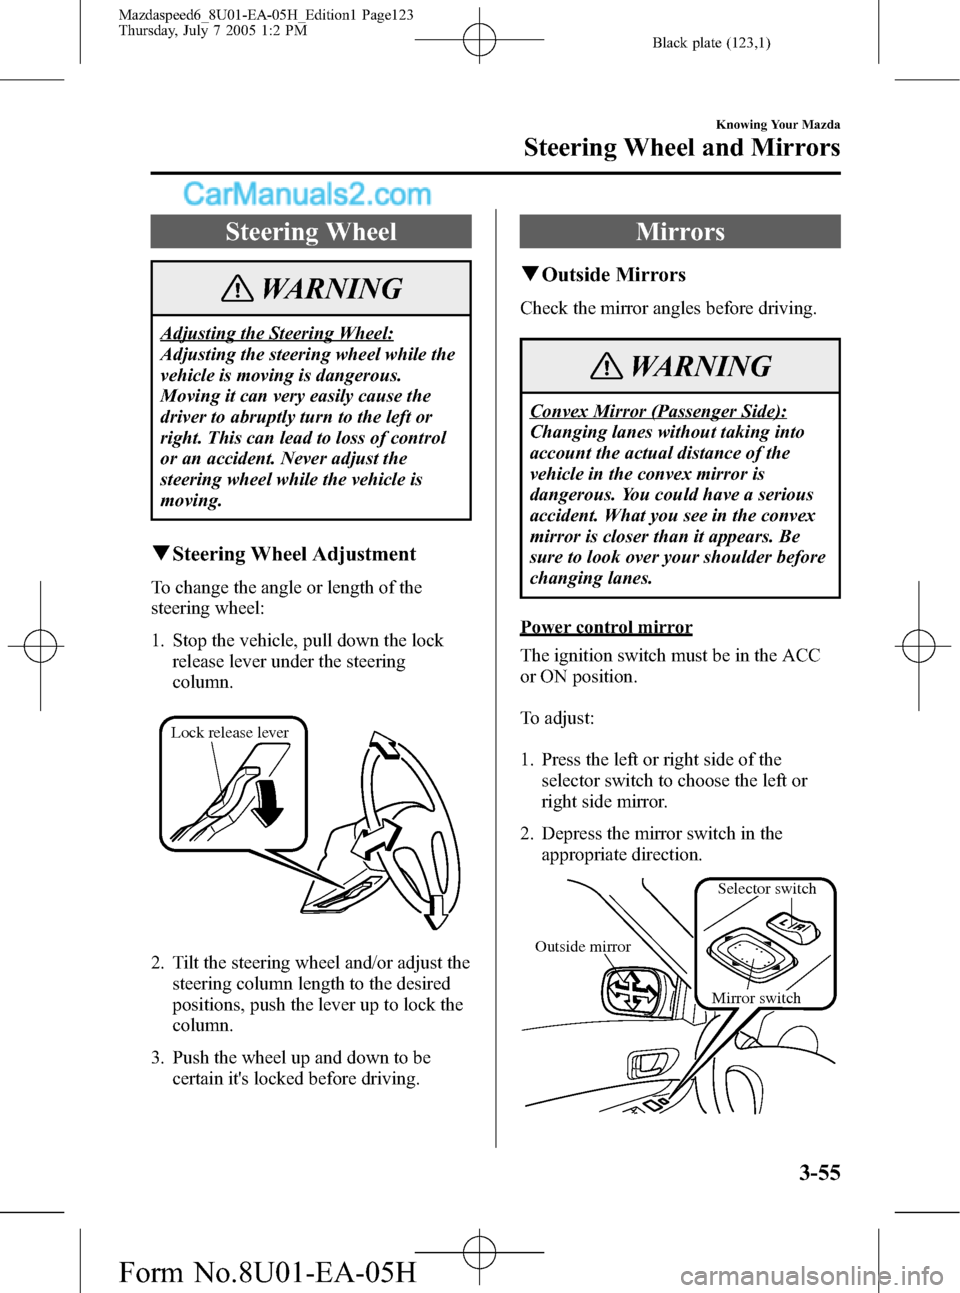 MAZDA MODEL MAZDASPEED 6 2006  Owners Manual (in English) Black plate (123,1)
Steering Wheel
WARNING
Adjusting the Steering Wheel:
Adjusting the steering wheel while the
vehicle is moving is dangerous.
Moving it can very easily cause the
driver to abruptly t